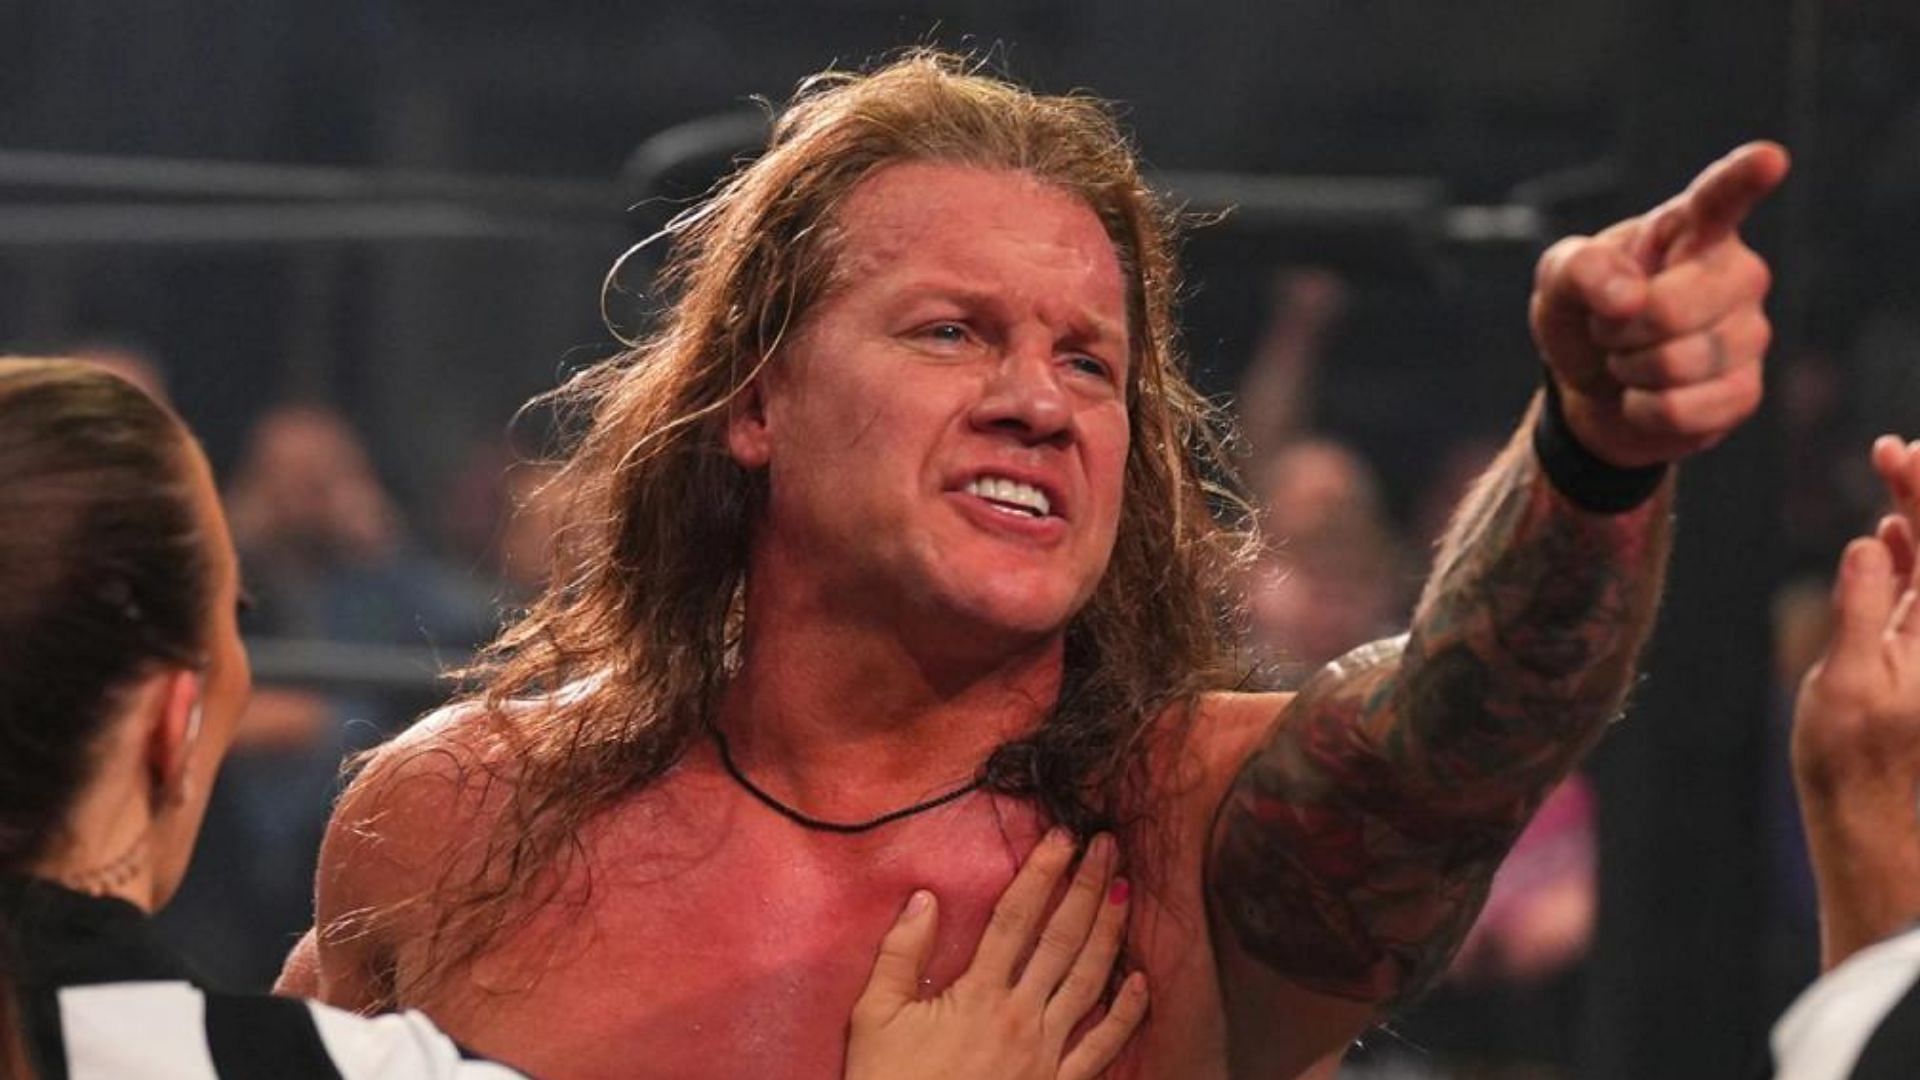 Chris Jericho is first ever AEW World Champion